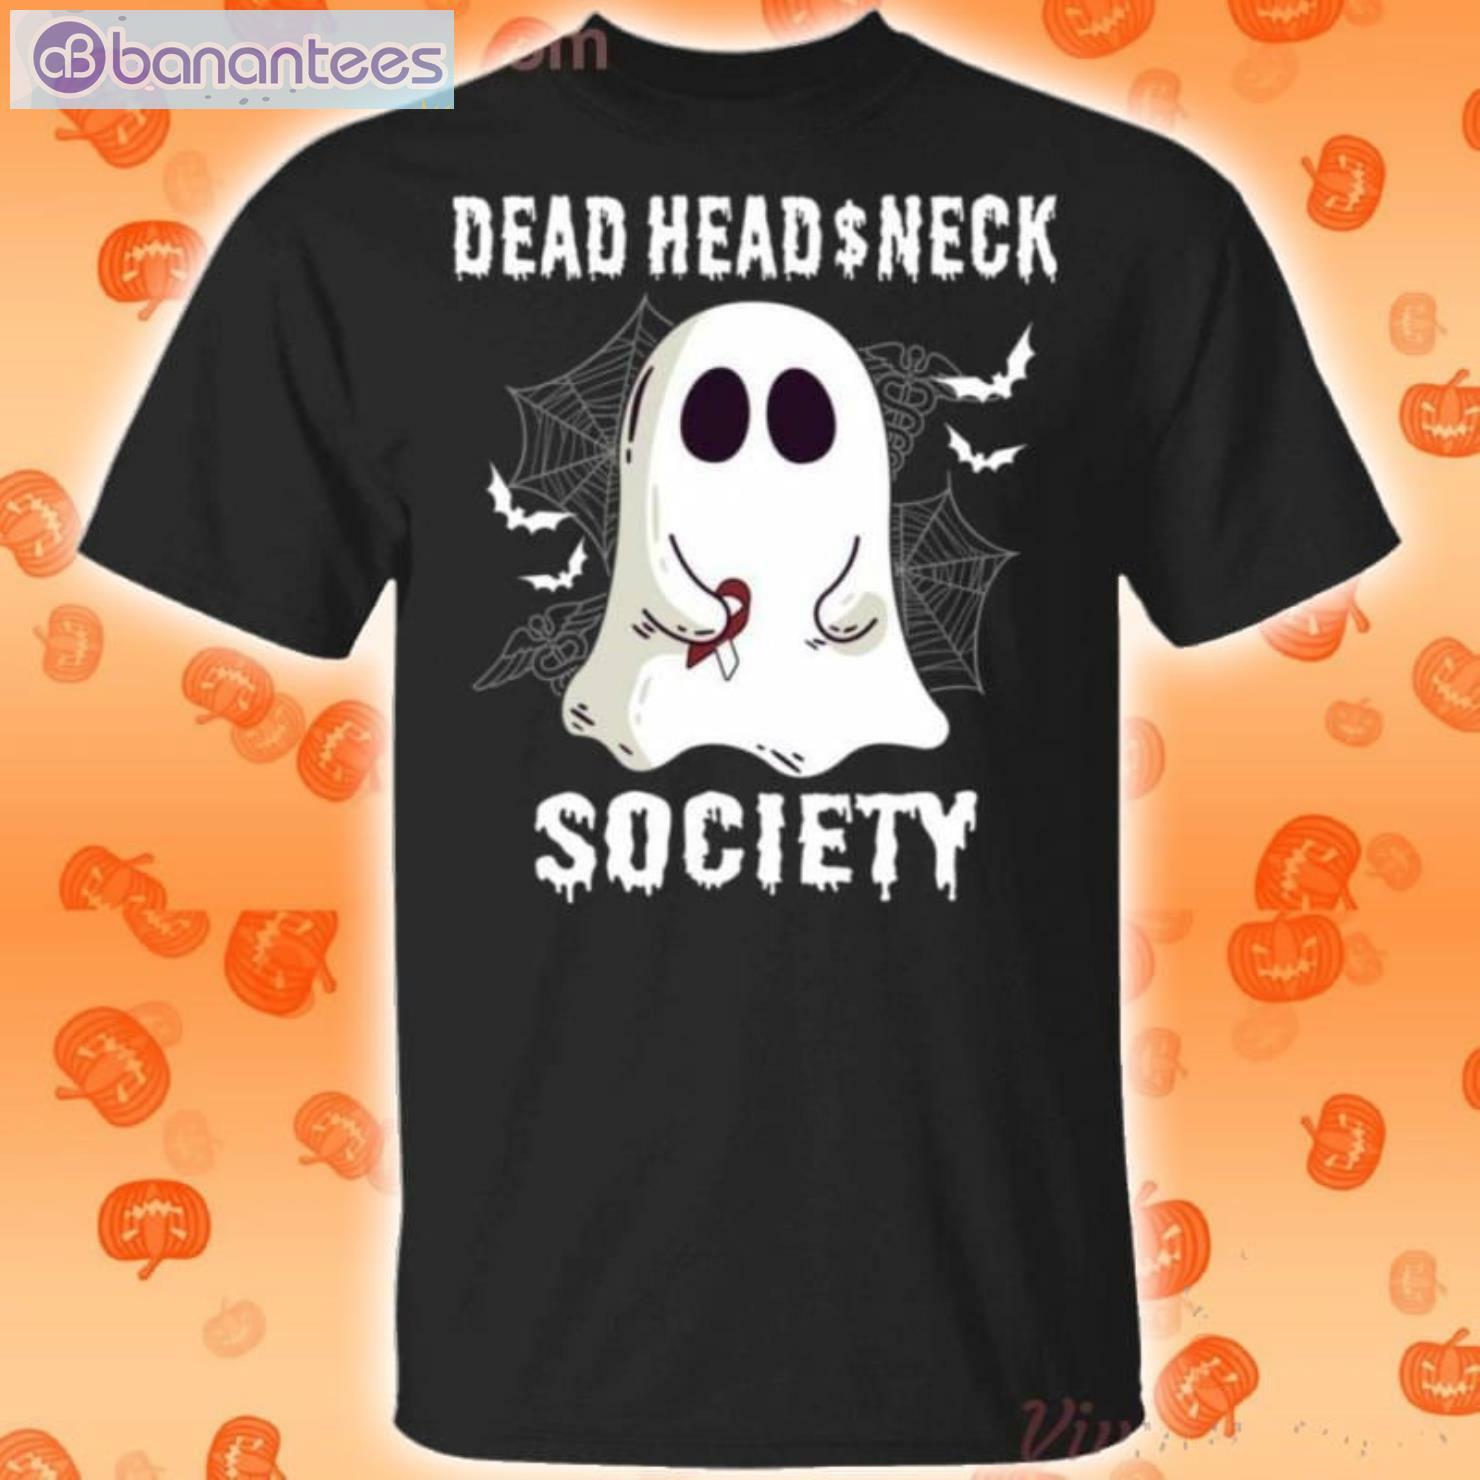 Dead Head And Neck Society Boo Ghost Halloween Funny T-Shirt Product Photo 1 Product photo 1